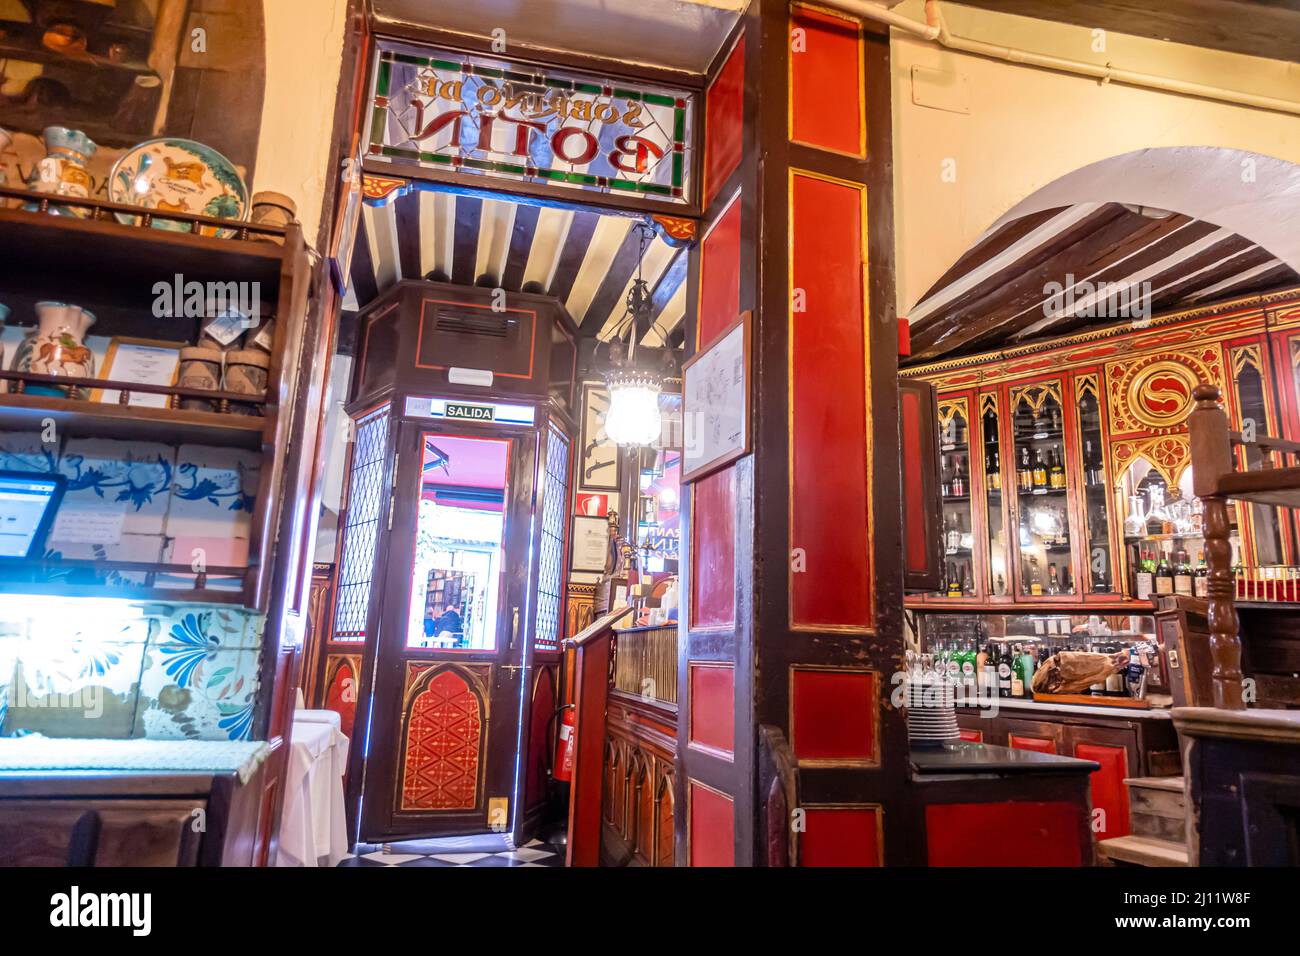 Spanish resturant Sobrino de Botin interior, founded in 1725, it's the oldest restaurant in the world in continuous operation.Madrid, Spain Stock Photo